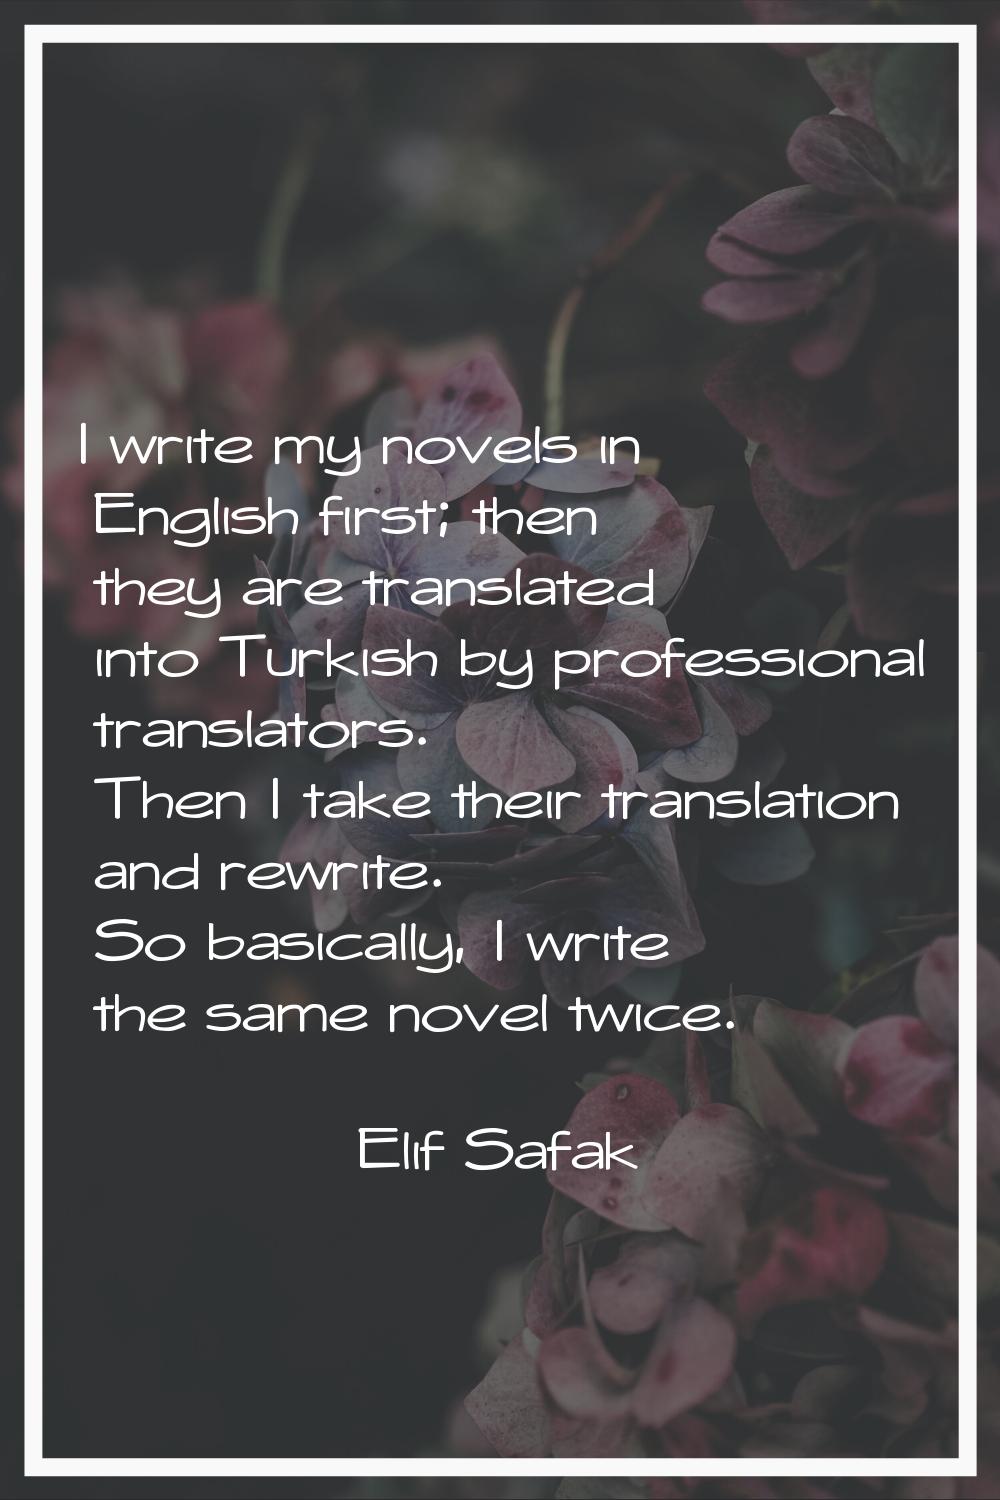 I write my novels in English first; then they are translated into Turkish by professional translato